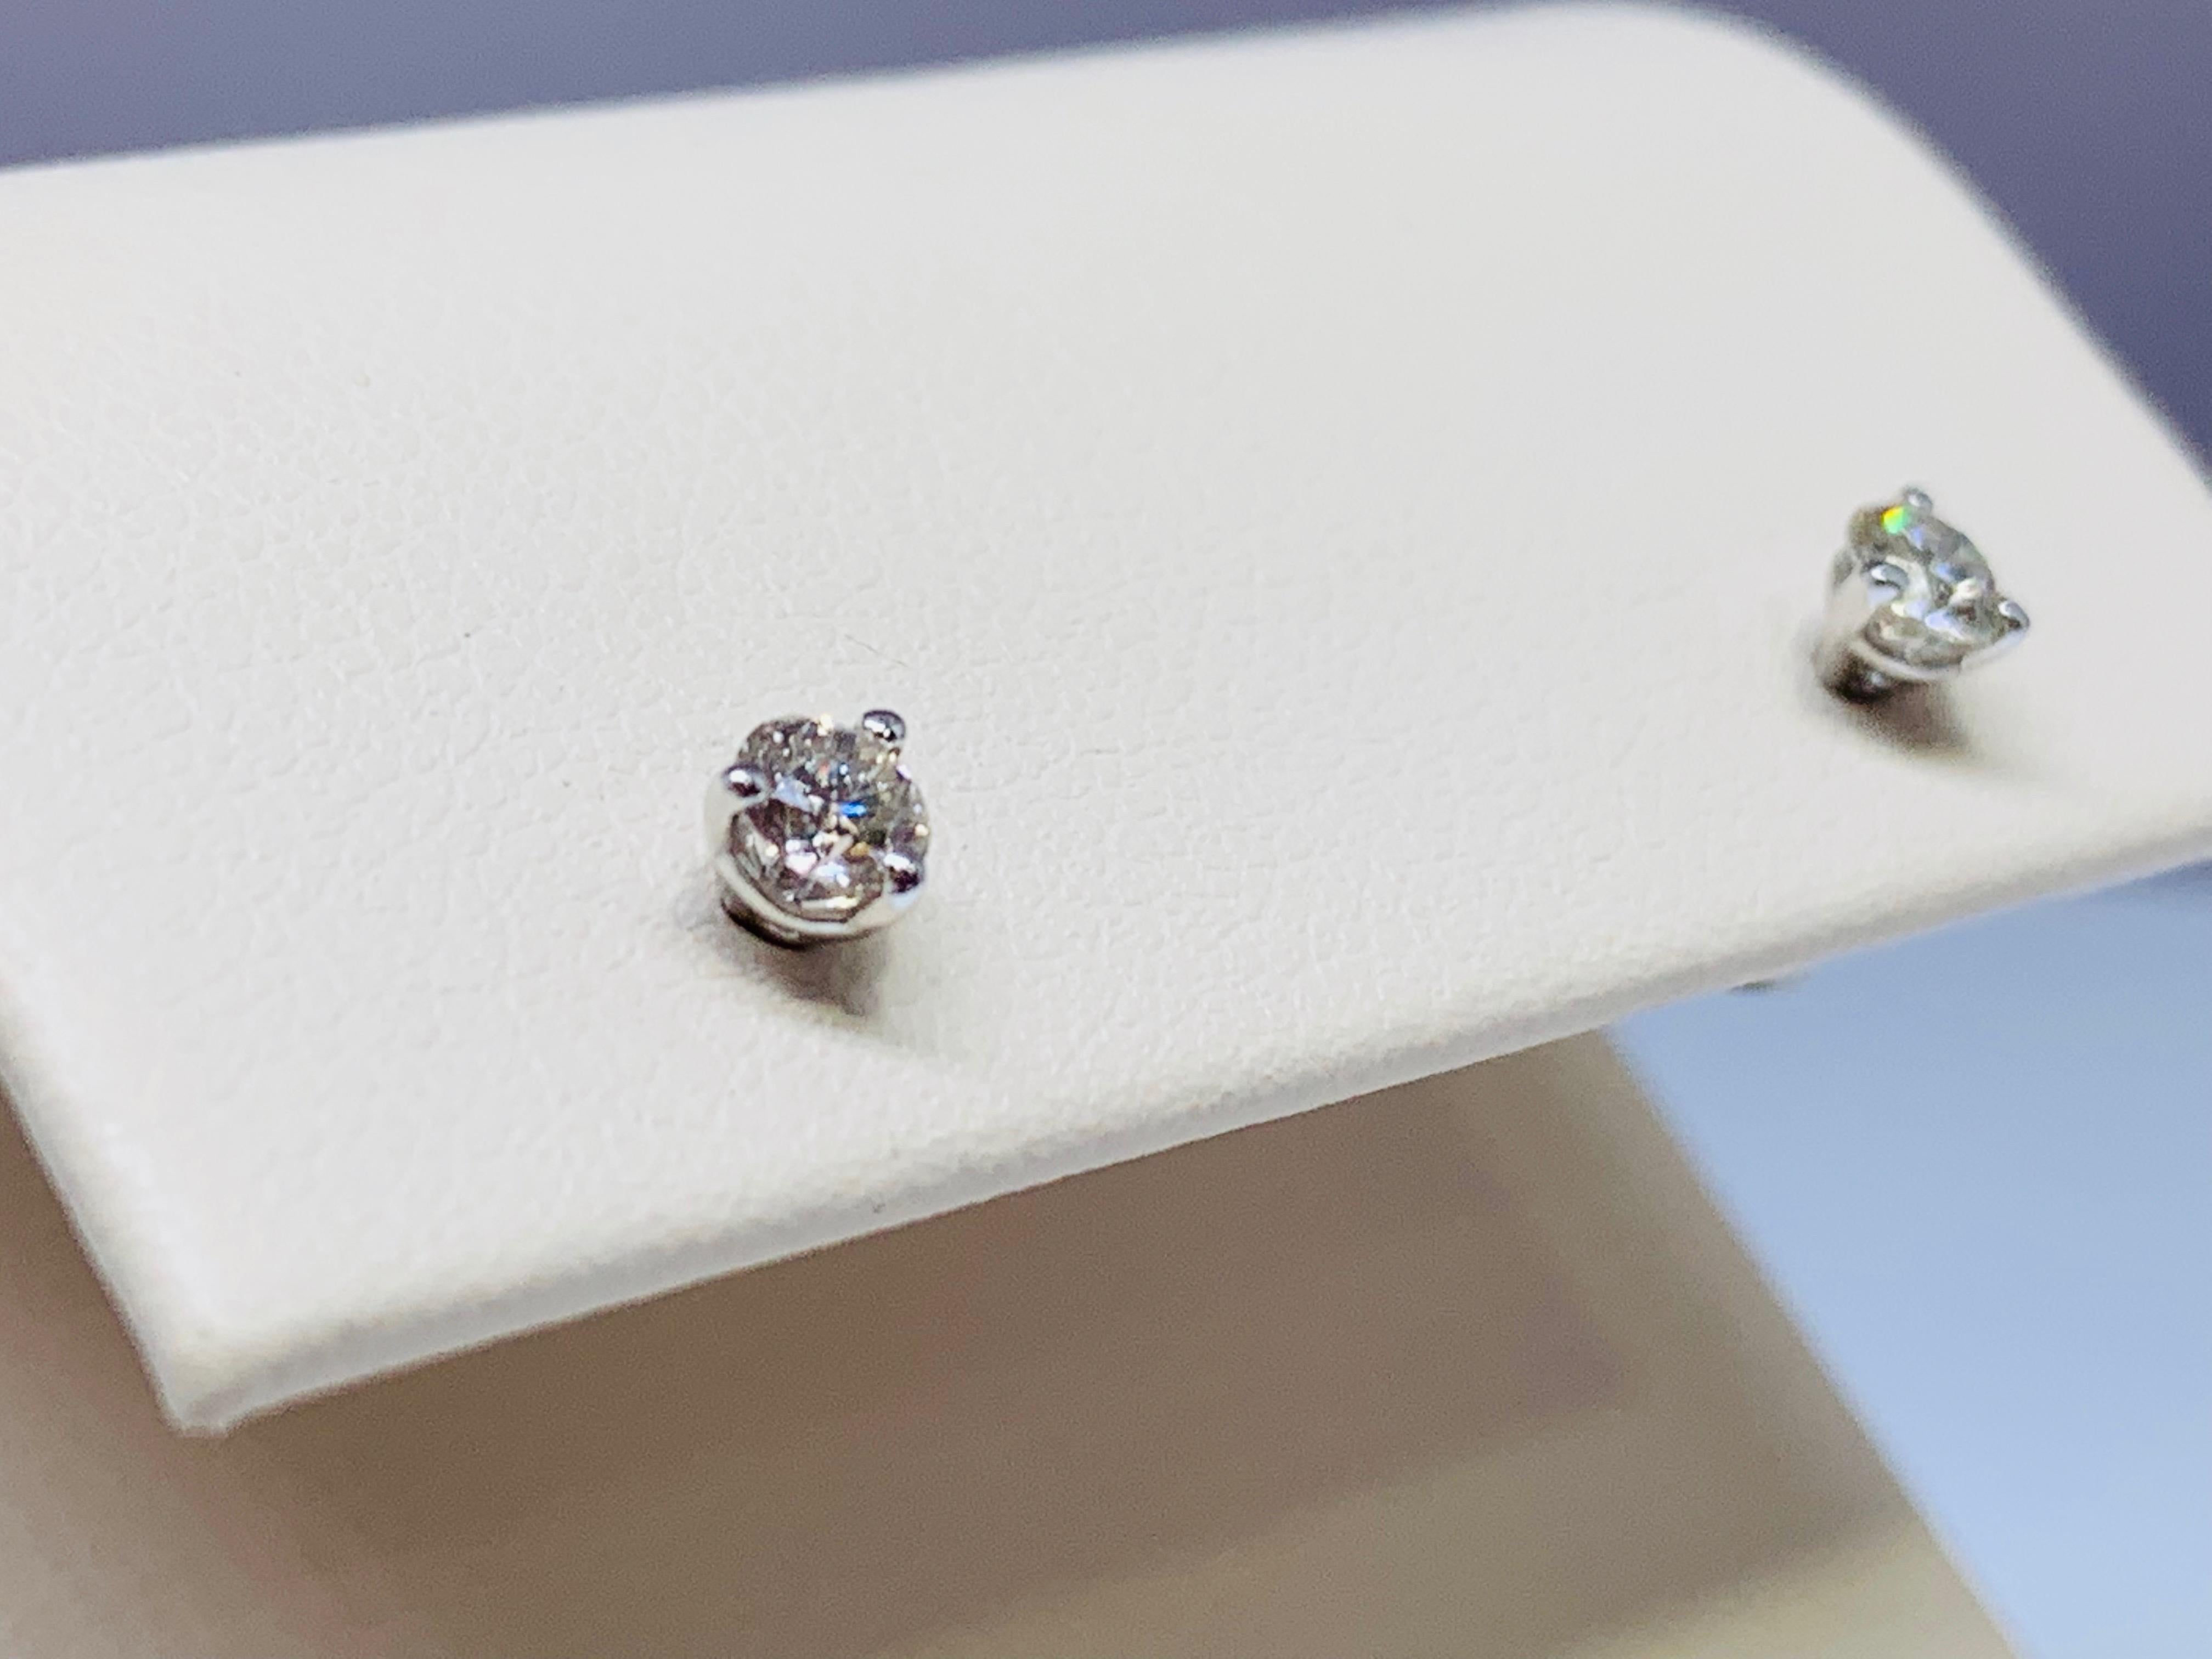 These 14K white gold diamond studs total 0.31 carats, holding a 0.155 carat diamond in each ear. The 3-prong martini style setting provides a classic look and includes sturdy 14K white gold tension backings. The diamond quality is estimated to be